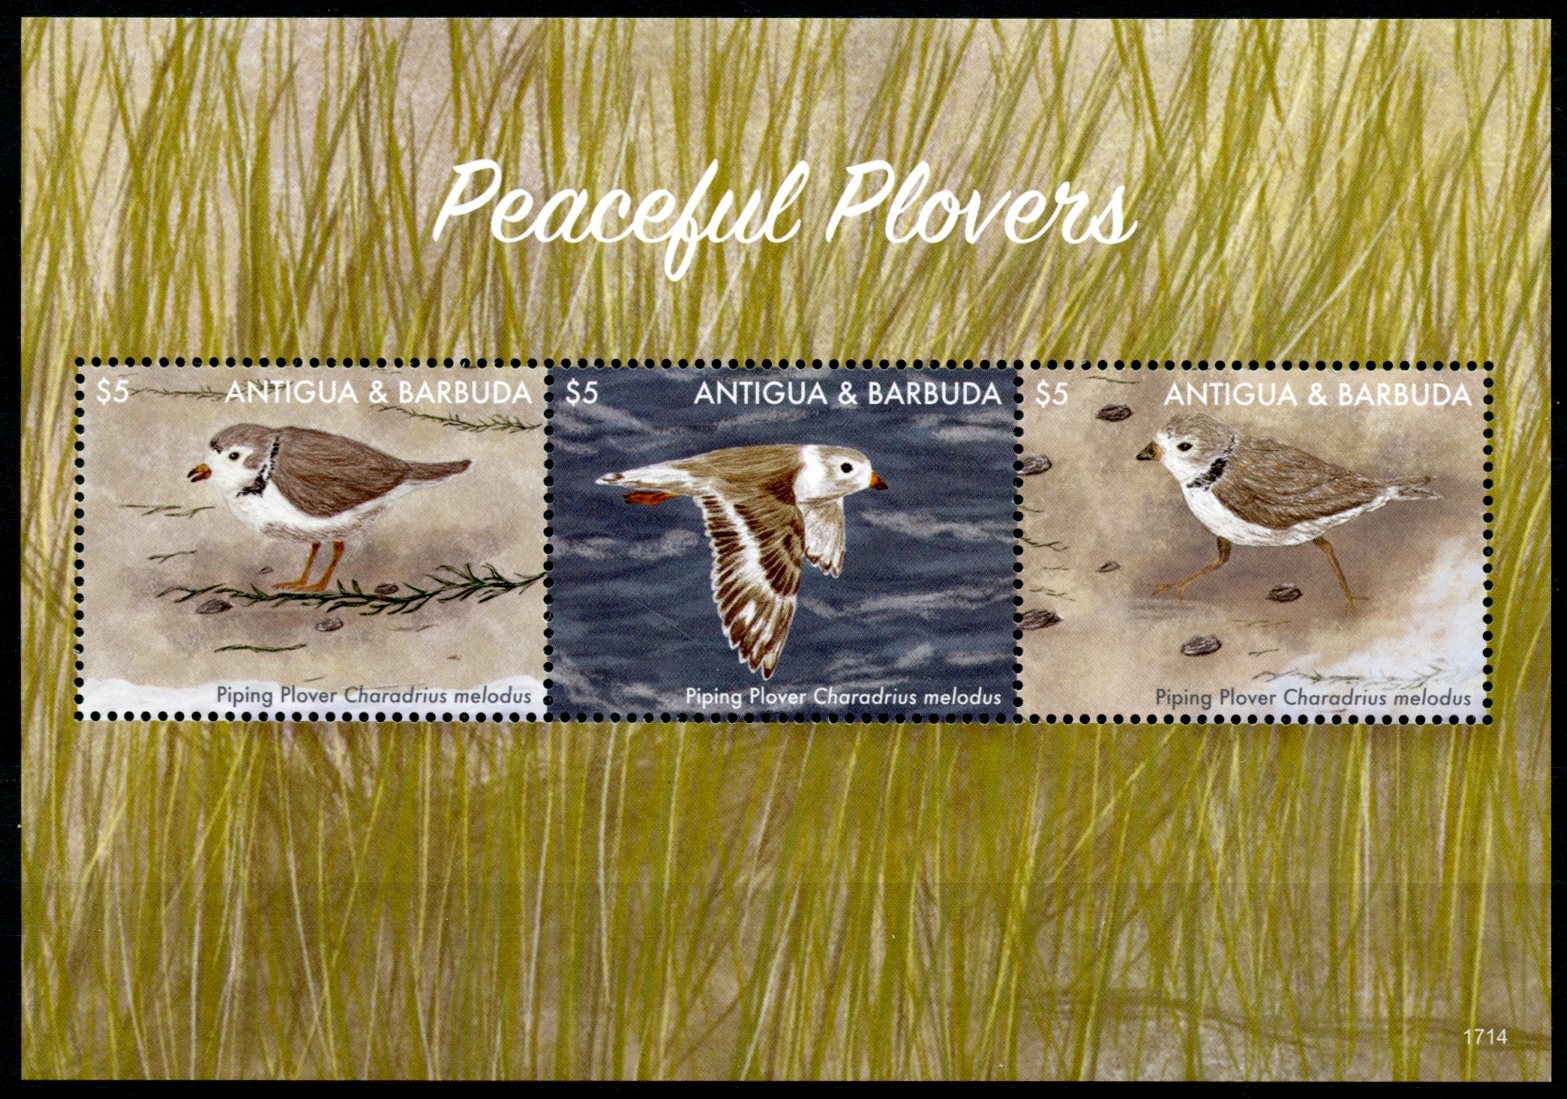 Antigua & Barbuda 2017 MNH Birds on Stamps Peaceful Plovers Piping Plover 3v M/S